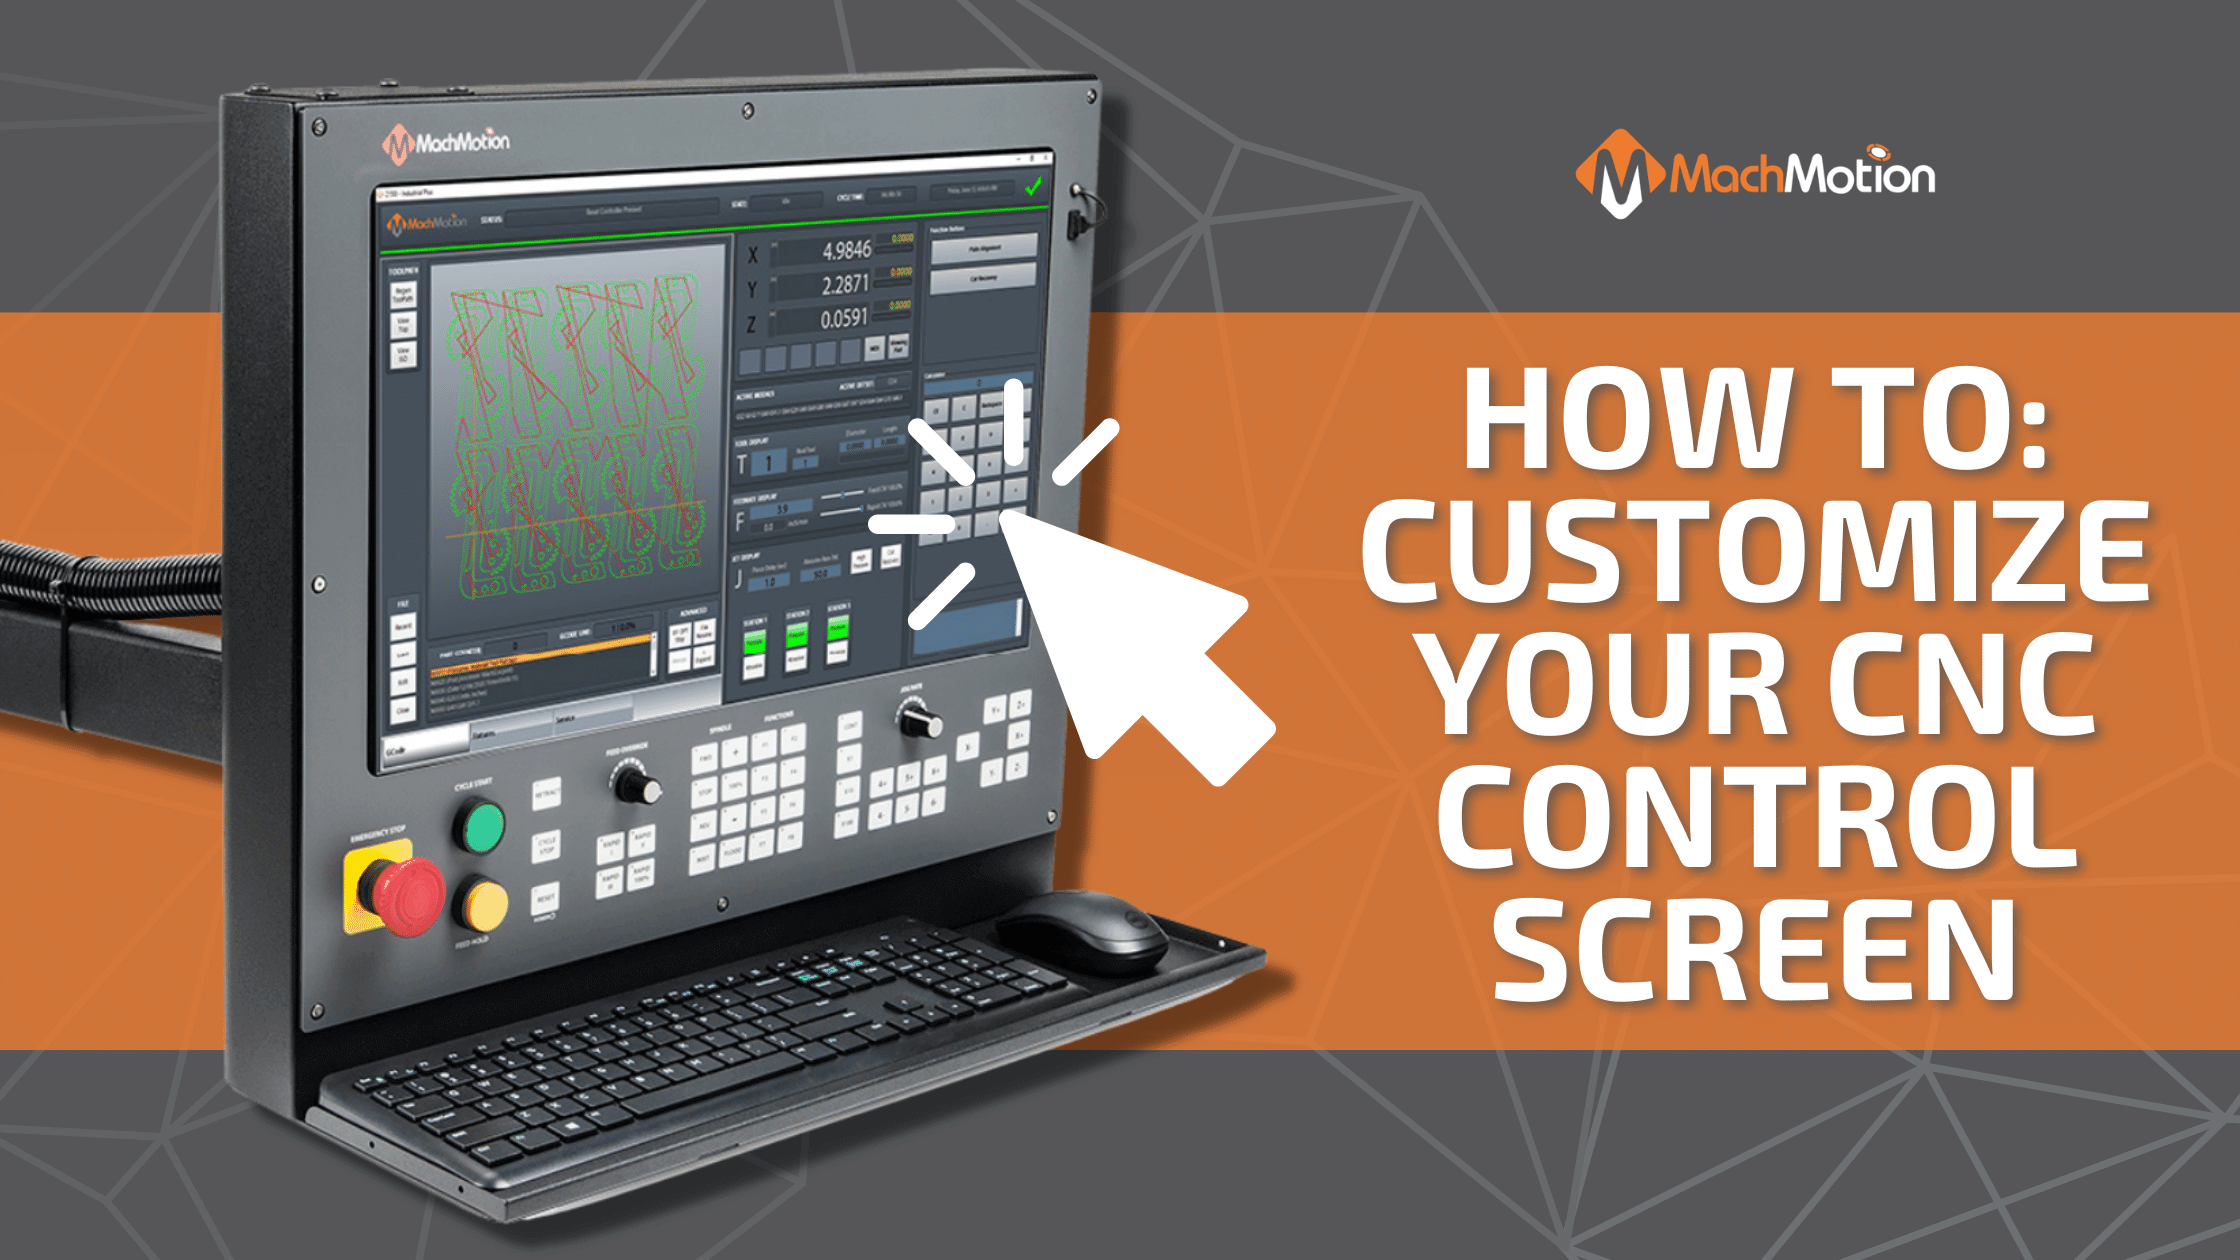 How To Customize CNC Control Screen